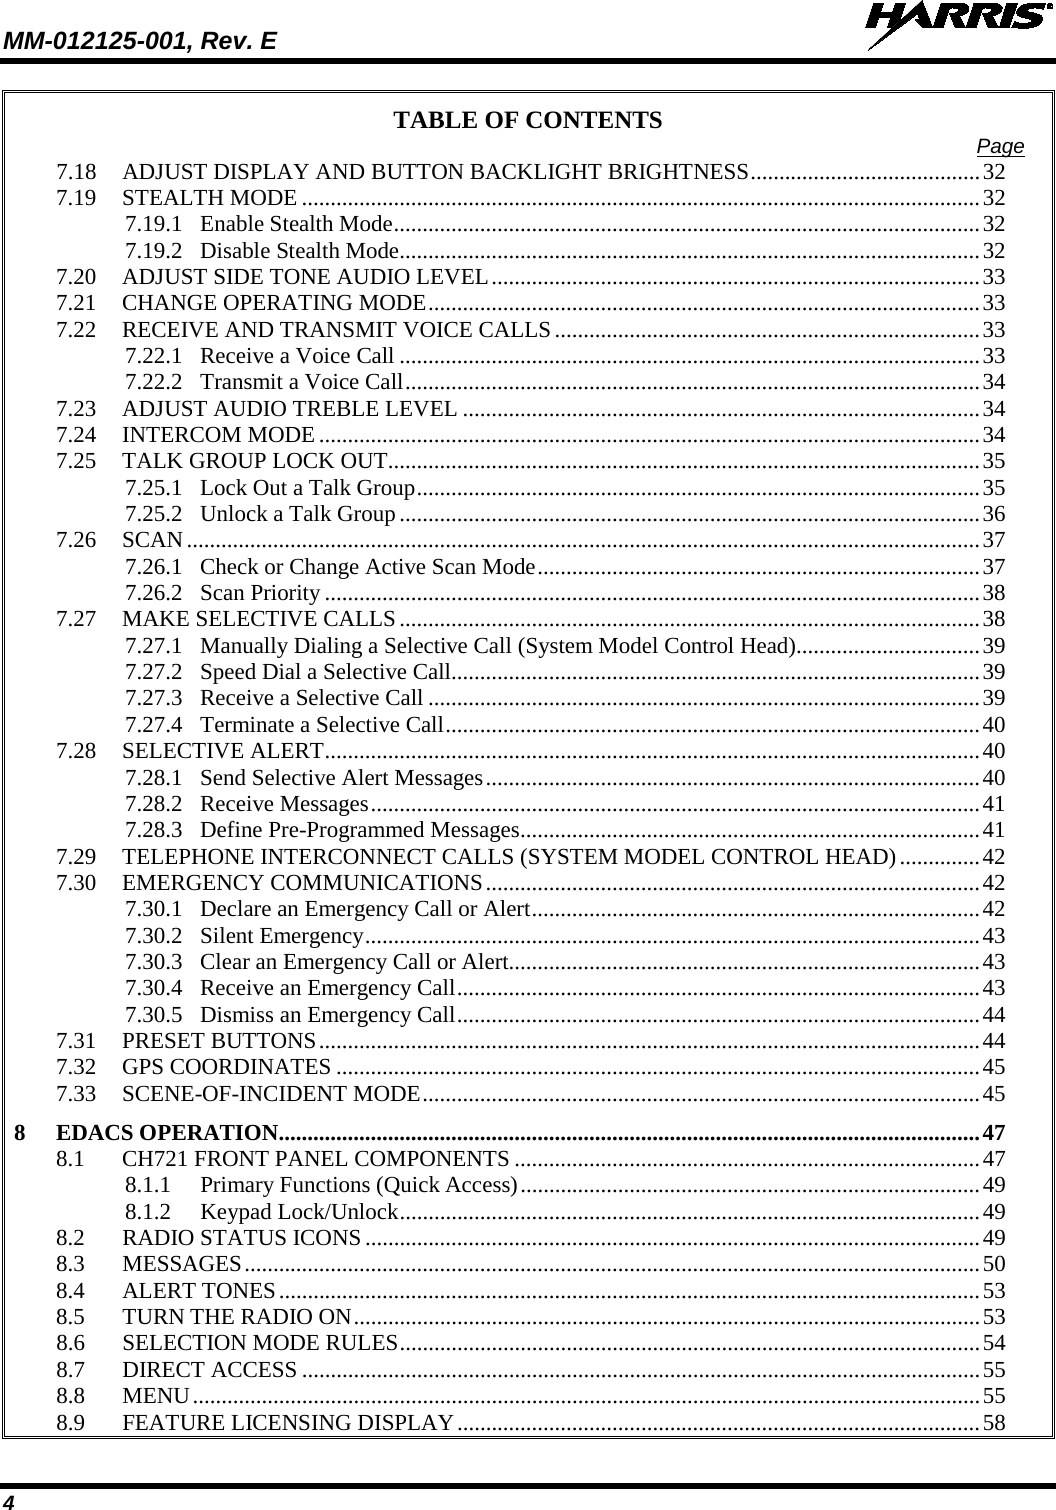 MM-012125-001, Rev. E   4 TABLE OF CONTENTS Page 7.18 ADJUST DISPLAY AND BUTTON BACKLIGHT BRIGHTNESS ........................................ 32 7.19 STEALTH MODE ...................................................................................................................... 32 7.19.1 Enable Stealth Mode ...................................................................................................... 32 7.19.2 Disable Stealth Mode ..................................................................................................... 32 7.20 ADJUST SIDE TONE AUDIO LEVEL ..................................................................................... 33 7.21 CHANGE OPERATING MODE ................................................................................................ 33 7.22 RECEIVE AND TRANSMIT VOICE CALLS .......................................................................... 33 7.22.1 Receive a Voice Call ..................................................................................................... 33 7.22.2 Transmit a Voice Call .................................................................................................... 34 7.23 ADJUST AUDIO TREBLE LEVEL .......................................................................................... 34 7.24 INTERCOM MODE ................................................................................................................... 34 7.25 TALK GROUP LOCK OUT ....................................................................................................... 35 7.25.1 Lock Out a Talk Group .................................................................................................. 35 7.25.2 Unlock a Talk Group ..................................................................................................... 36 7.26 SCAN .......................................................................................................................................... 37 7.26.1 Check or Change Active Scan Mode ............................................................................. 37 7.26.2 Scan Priority .................................................................................................................. 38 7.27 MAKE SELECTIVE CALLS ..................................................................................................... 38 7.27.1 Manually Dialing a Selective Call (System Model Control Head) ................................ 39 7.27.2 Speed Dial a Selective Call ............................................................................................ 39 7.27.3 Receive a Selective Call ................................................................................................ 39 7.27.4 Terminate a Selective Call ............................................................................................. 40 7.28 SELECTIVE ALERT .................................................................................................................. 40 7.28.1 Send Selective Alert Messages ...................................................................................... 40 7.28.2 Receive Messages .......................................................................................................... 41 7.28.3 Define Pre-Programmed Messages ................................................................................ 41 7.29 TELEPHONE INTERCONNECT CALLS (SYSTEM MODEL CONTROL HEAD) .............. 42 7.30 EMERGENCY COMMUNICATIONS ...................................................................................... 42 7.30.1 Declare an Emergency Call or Alert .............................................................................. 42 7.30.2 Silent Emergency ........................................................................................................... 43 7.30.3 Clear an Emergency Call or Alert.................................................................................. 43 7.30.4 Receive an Emergency Call ........................................................................................... 43 7.30.5 Dismiss an Emergency Call ........................................................................................... 44 7.31 PRESET BUTTONS ................................................................................................................... 44 7.32 GPS COORDINATES ................................................................................................................ 45 7.33 SCENE-OF-INCIDENT MODE ................................................................................................. 45 8 EDACS OPERATION .......................................................................................................................... 47 8.1 CH721 FRONT PANEL COMPONENTS ................................................................................. 47 8.1.1 Primary Functions (Quick Access) ................................................................................ 49 8.1.2 Keypad Lock/Unlock ..................................................................................................... 49 8.2 RADIO STATUS ICONS ........................................................................................................... 49 8.3 MESSAGES ................................................................................................................................ 50 8.4 ALERT TONES .......................................................................................................................... 53 8.5 TURN THE RADIO ON ............................................................................................................. 53 8.6 SELECTION MODE RULES ..................................................................................................... 54 8.7 DIRECT ACCESS ...................................................................................................................... 55 8.8 MENU ......................................................................................................................................... 55 8.9 FEATURE LICENSING DISPLAY ........................................................................................... 58 